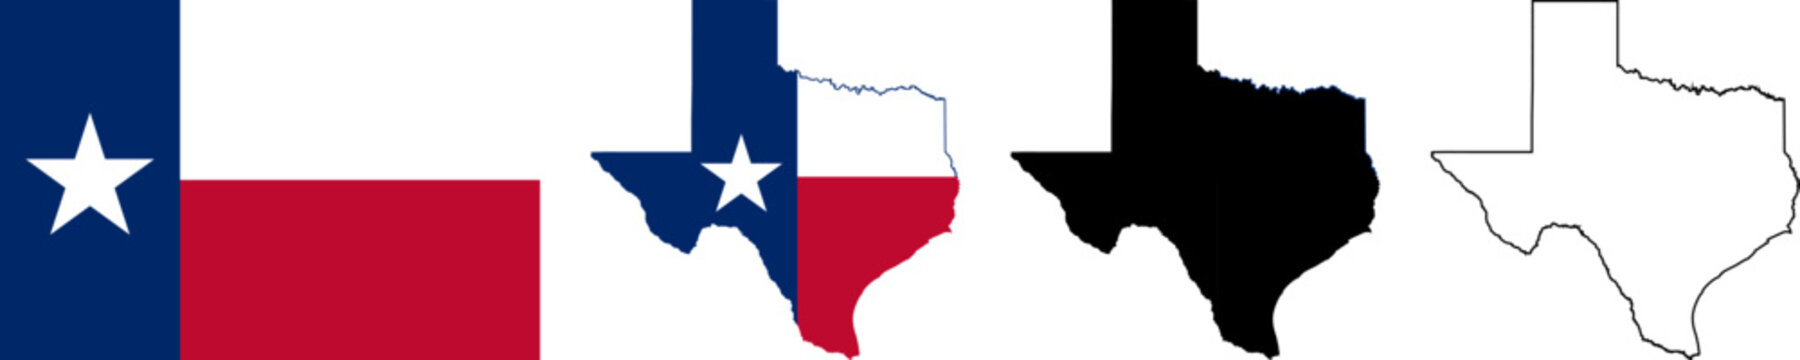 Texas State National Flag Map Texan outline black silhouette